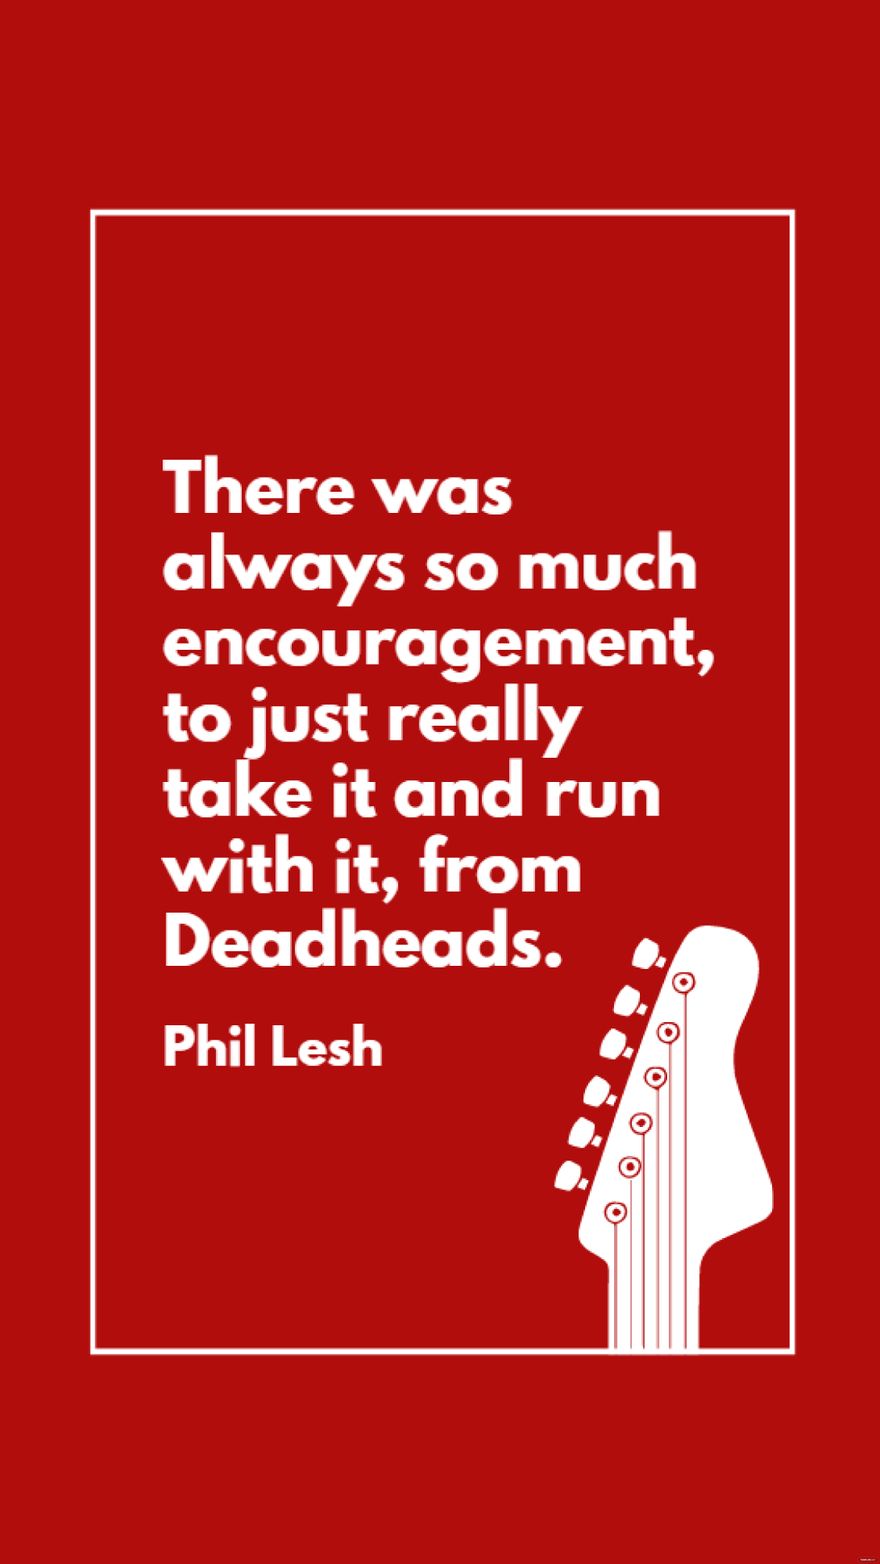 Phil Lesh - There was always so much encouragement, to just really take it and run with it, from Deadheads. Template